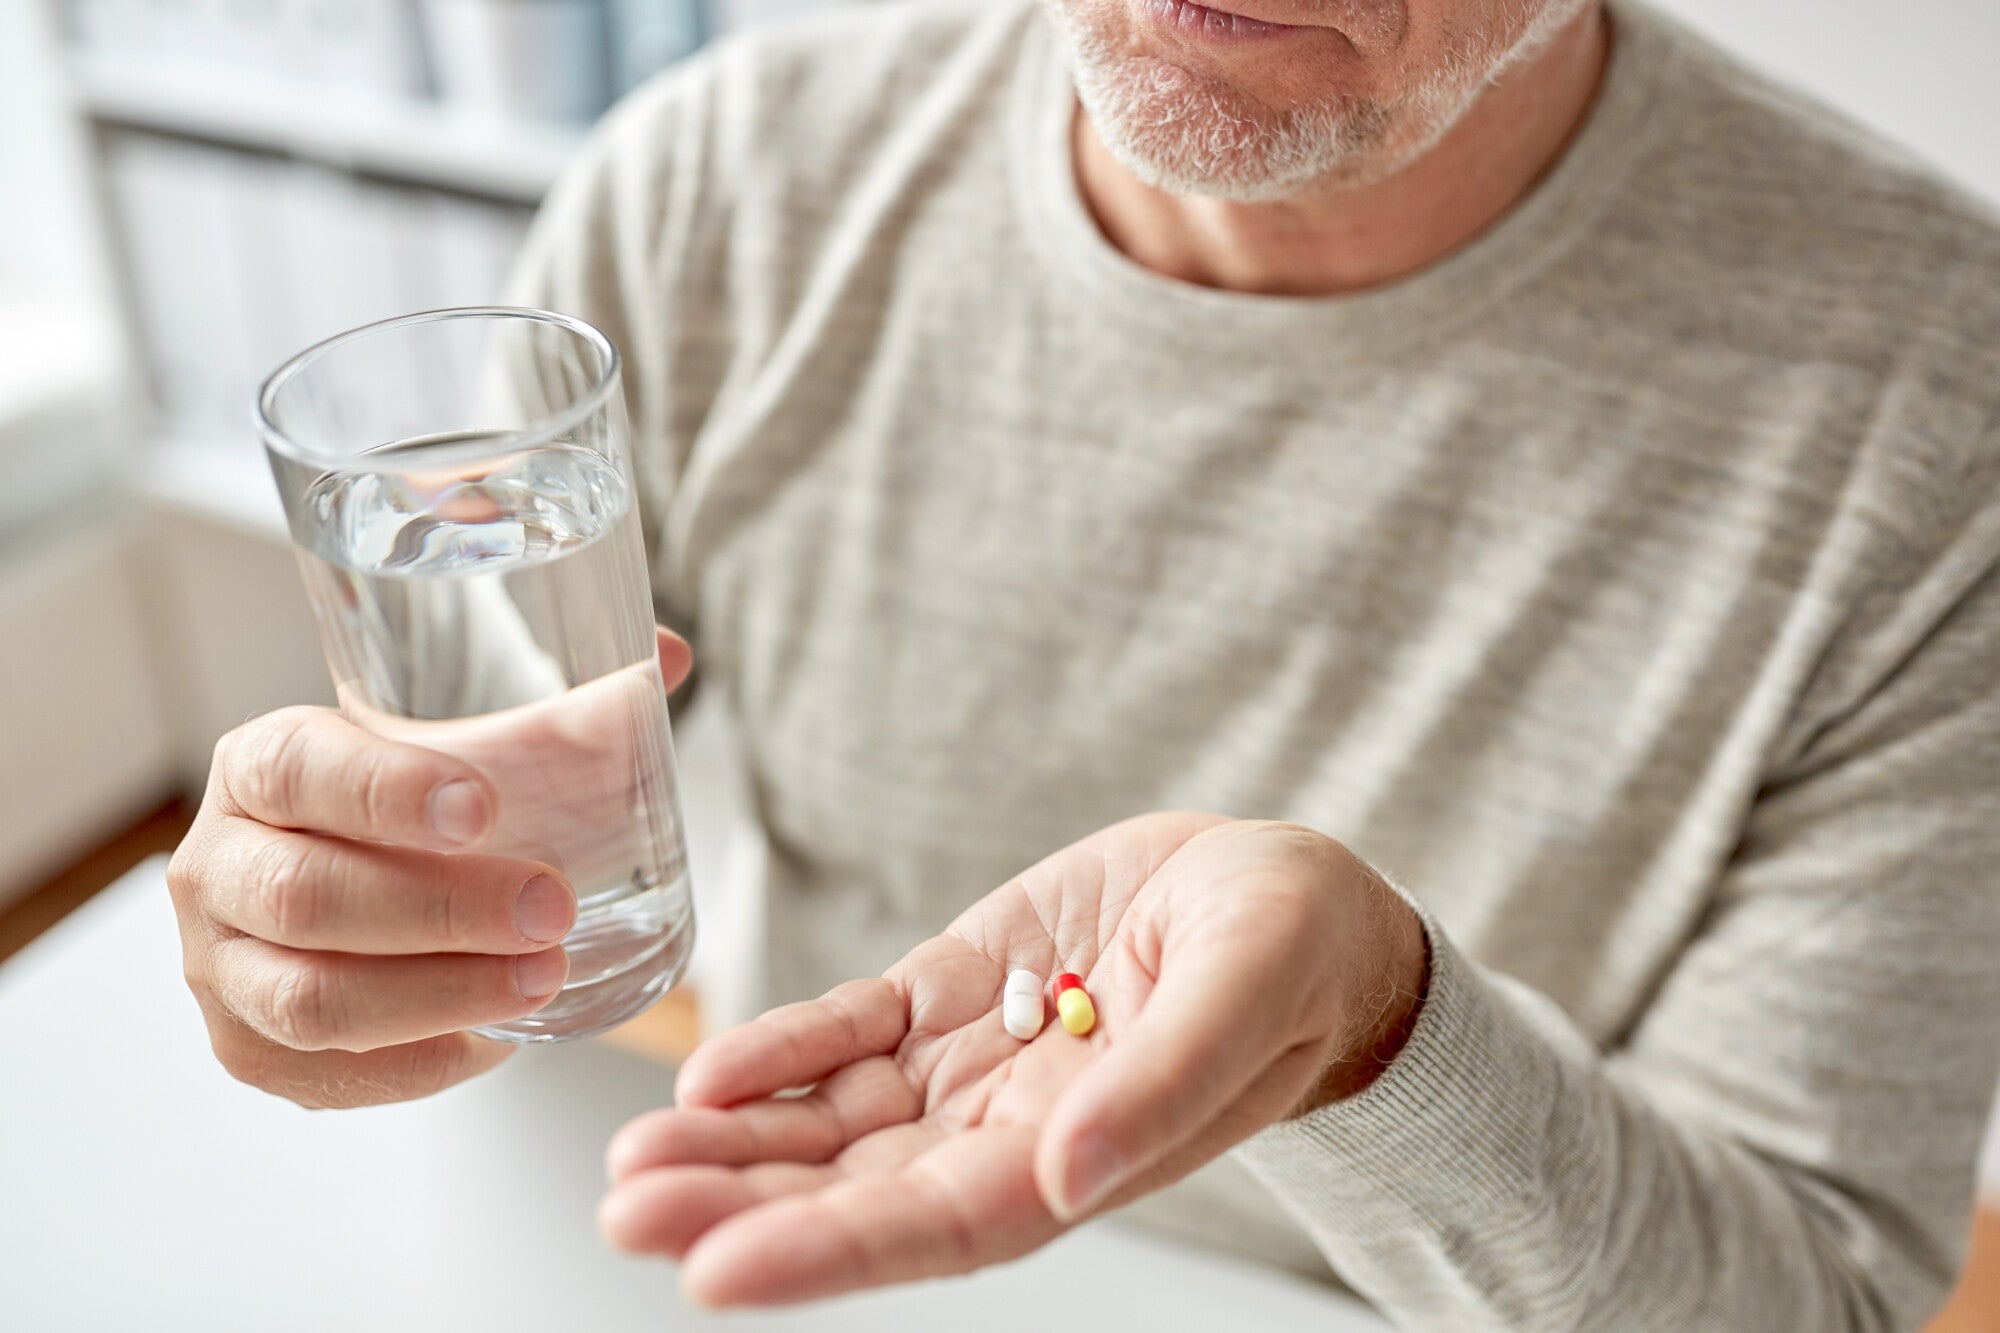 What Is the Best Multivitamin for Men?